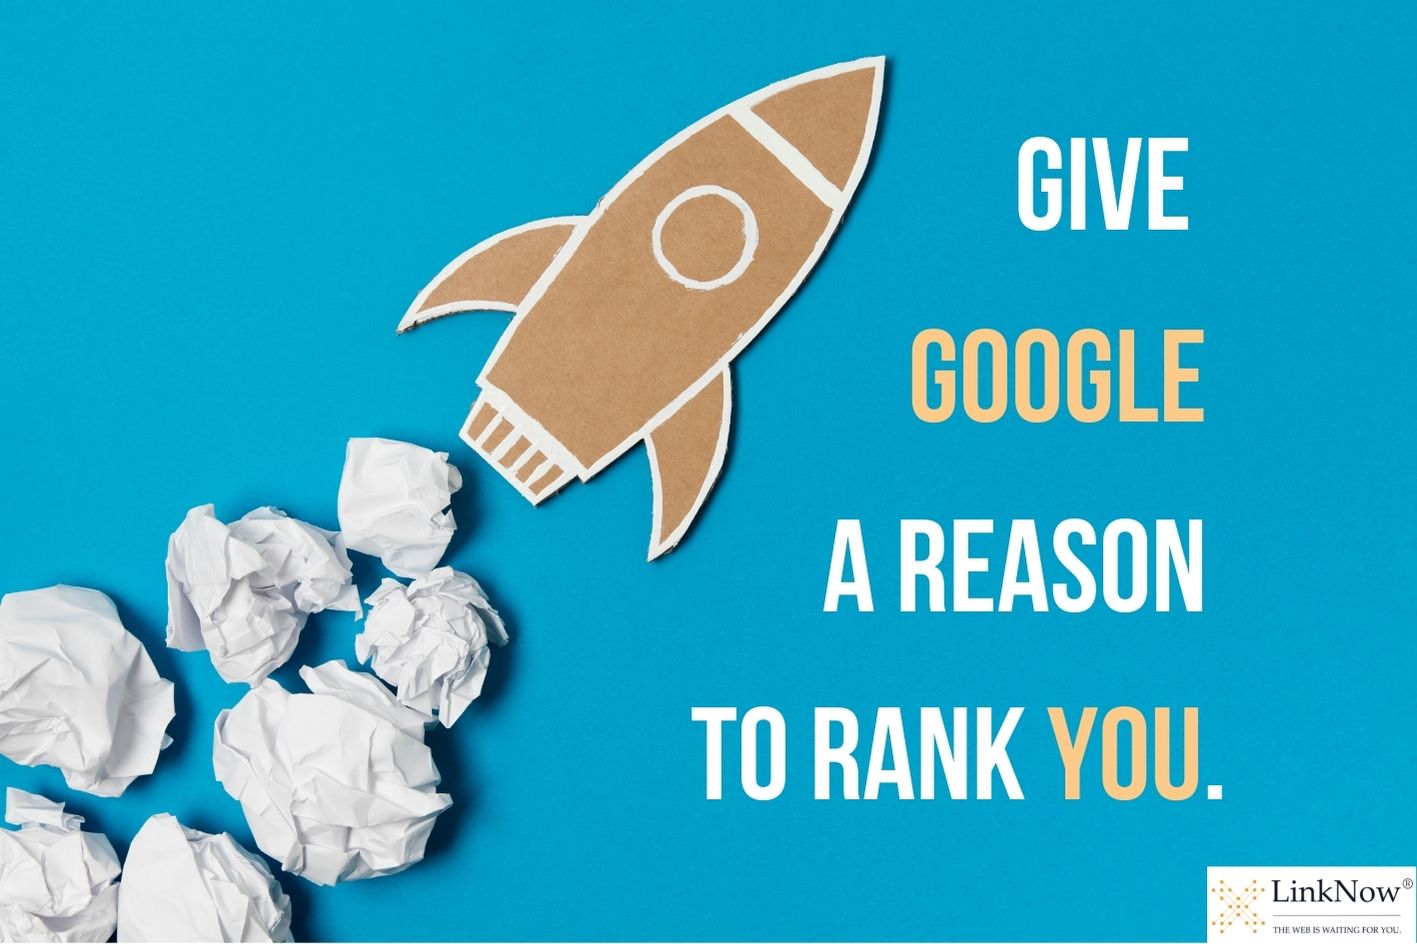 A rocketship made of brown construction paper blasts off. Text says: "Give Google a reason to rank you."